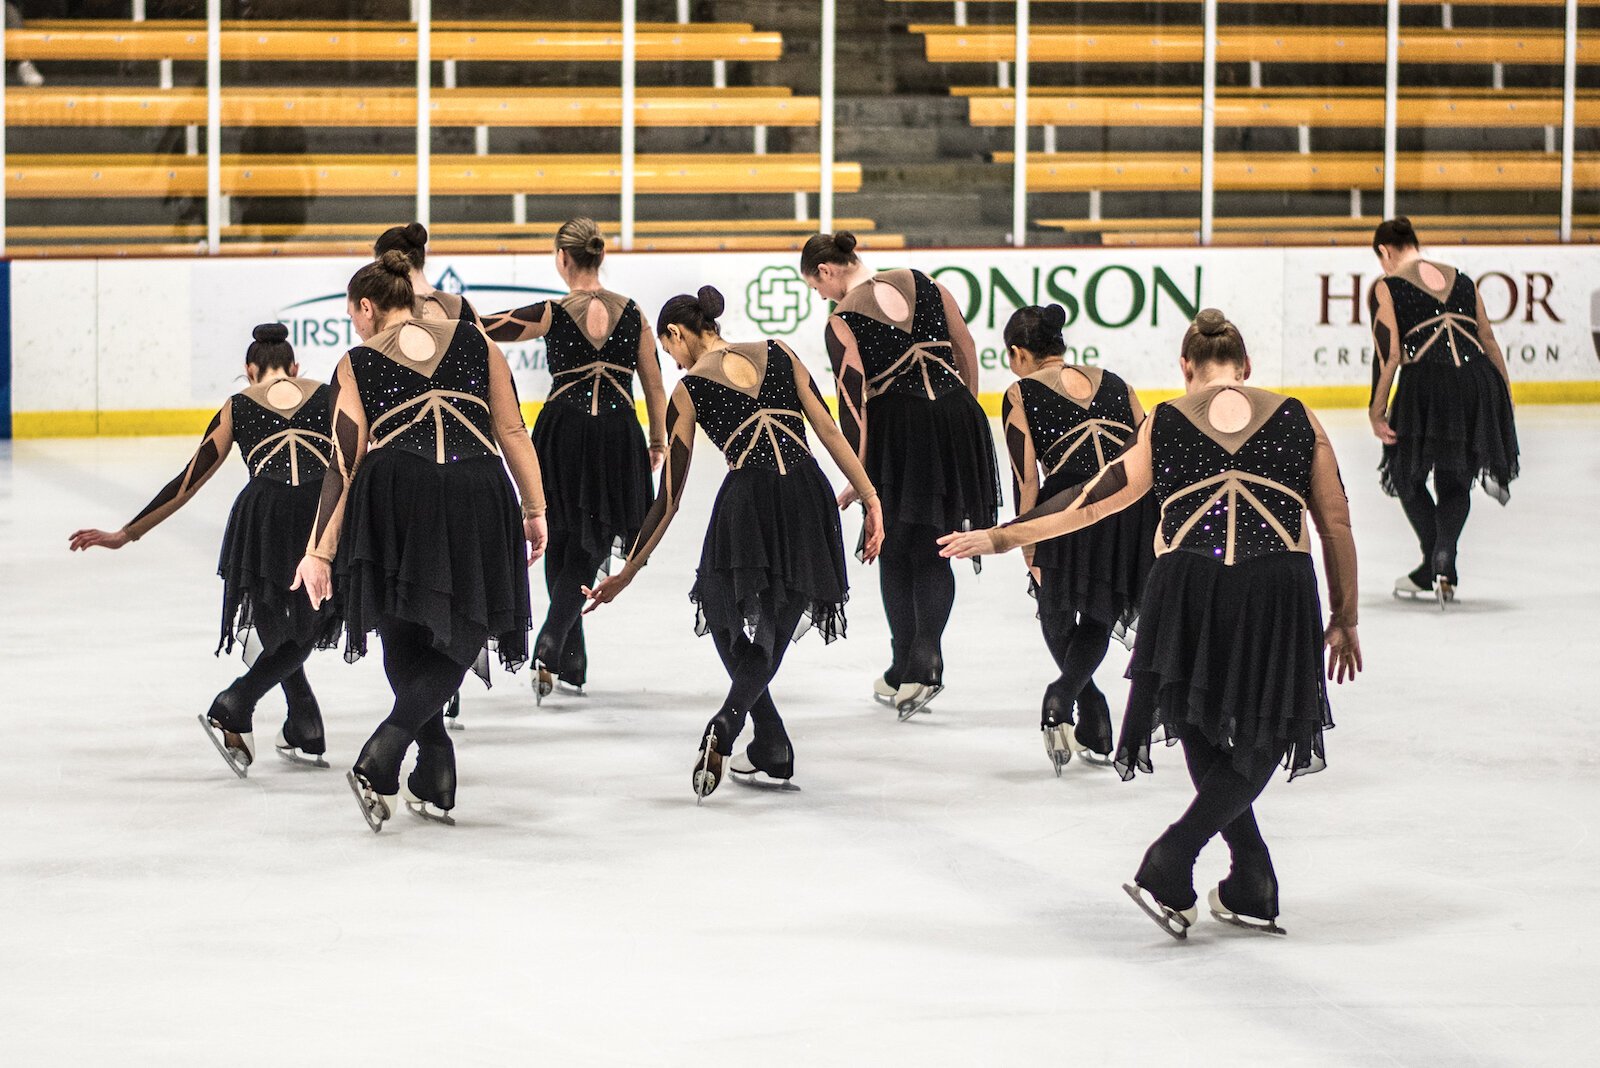 The Kinetics synchronized skating team is part of the Greater Kalamazoo Skating Association.